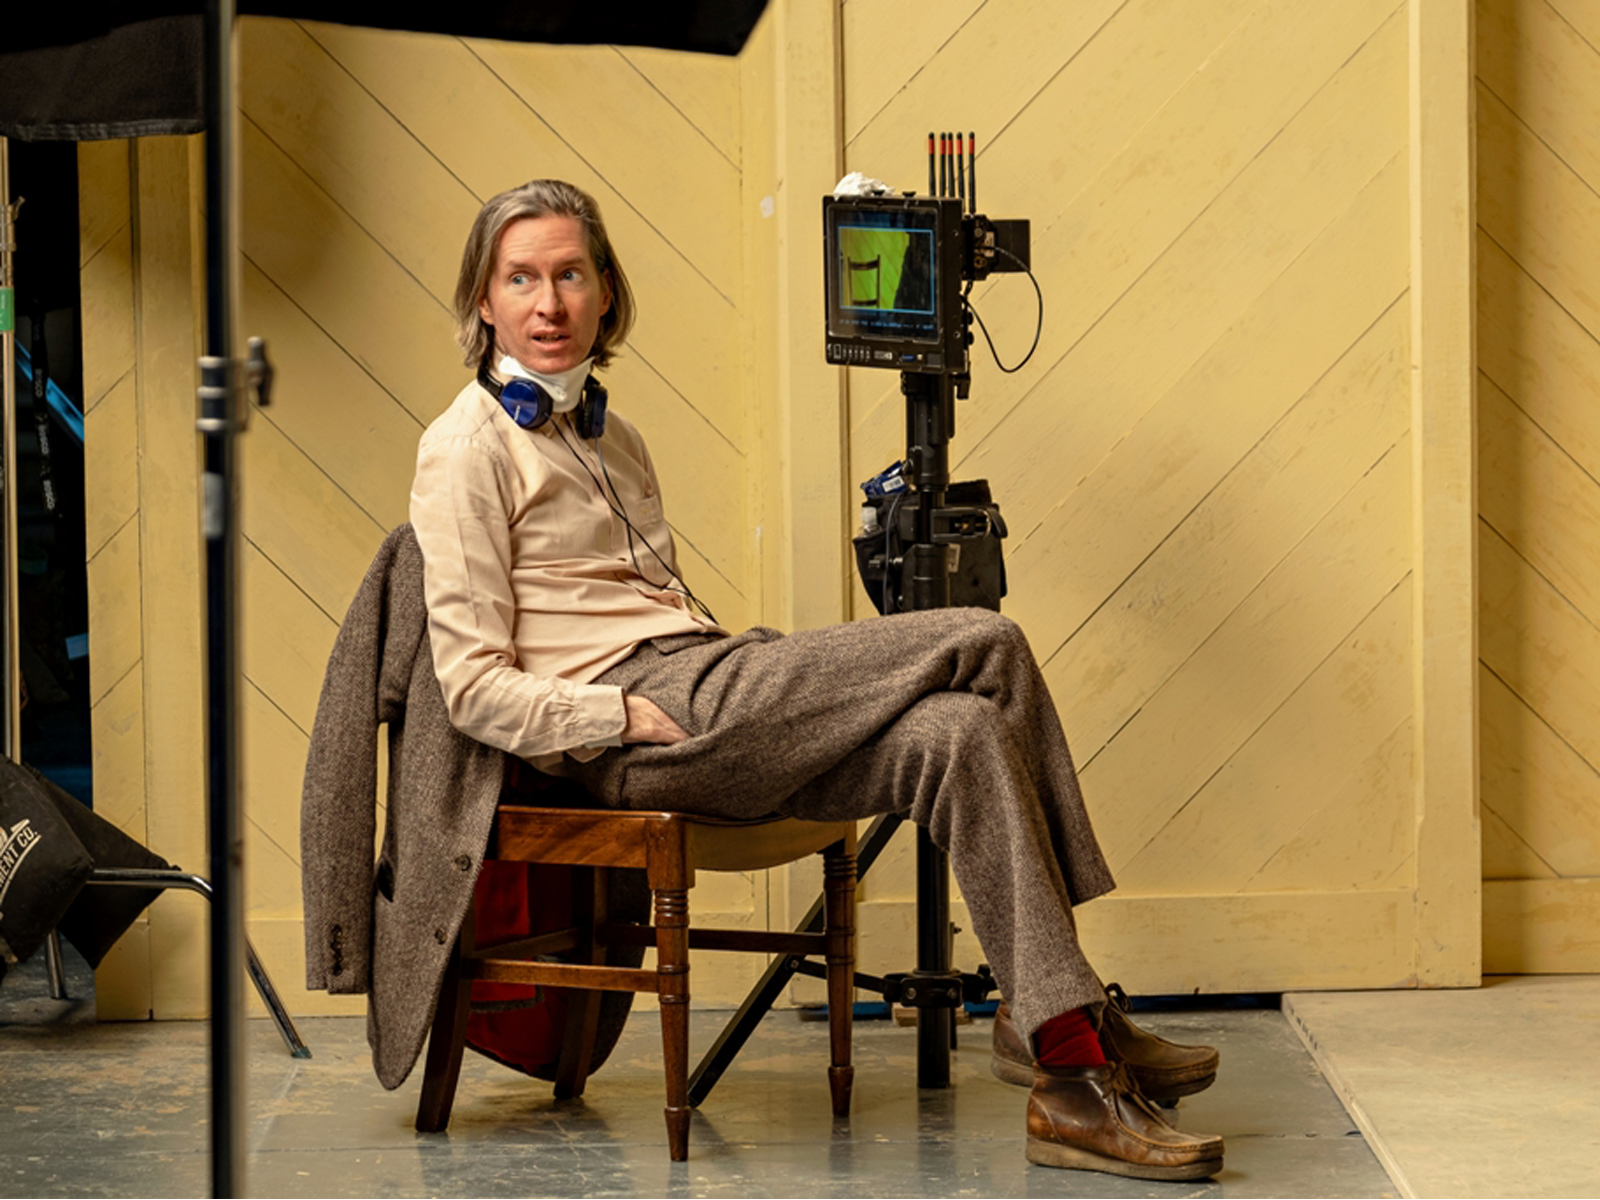 enter the endlessly inventive, surreal world of wes anderson